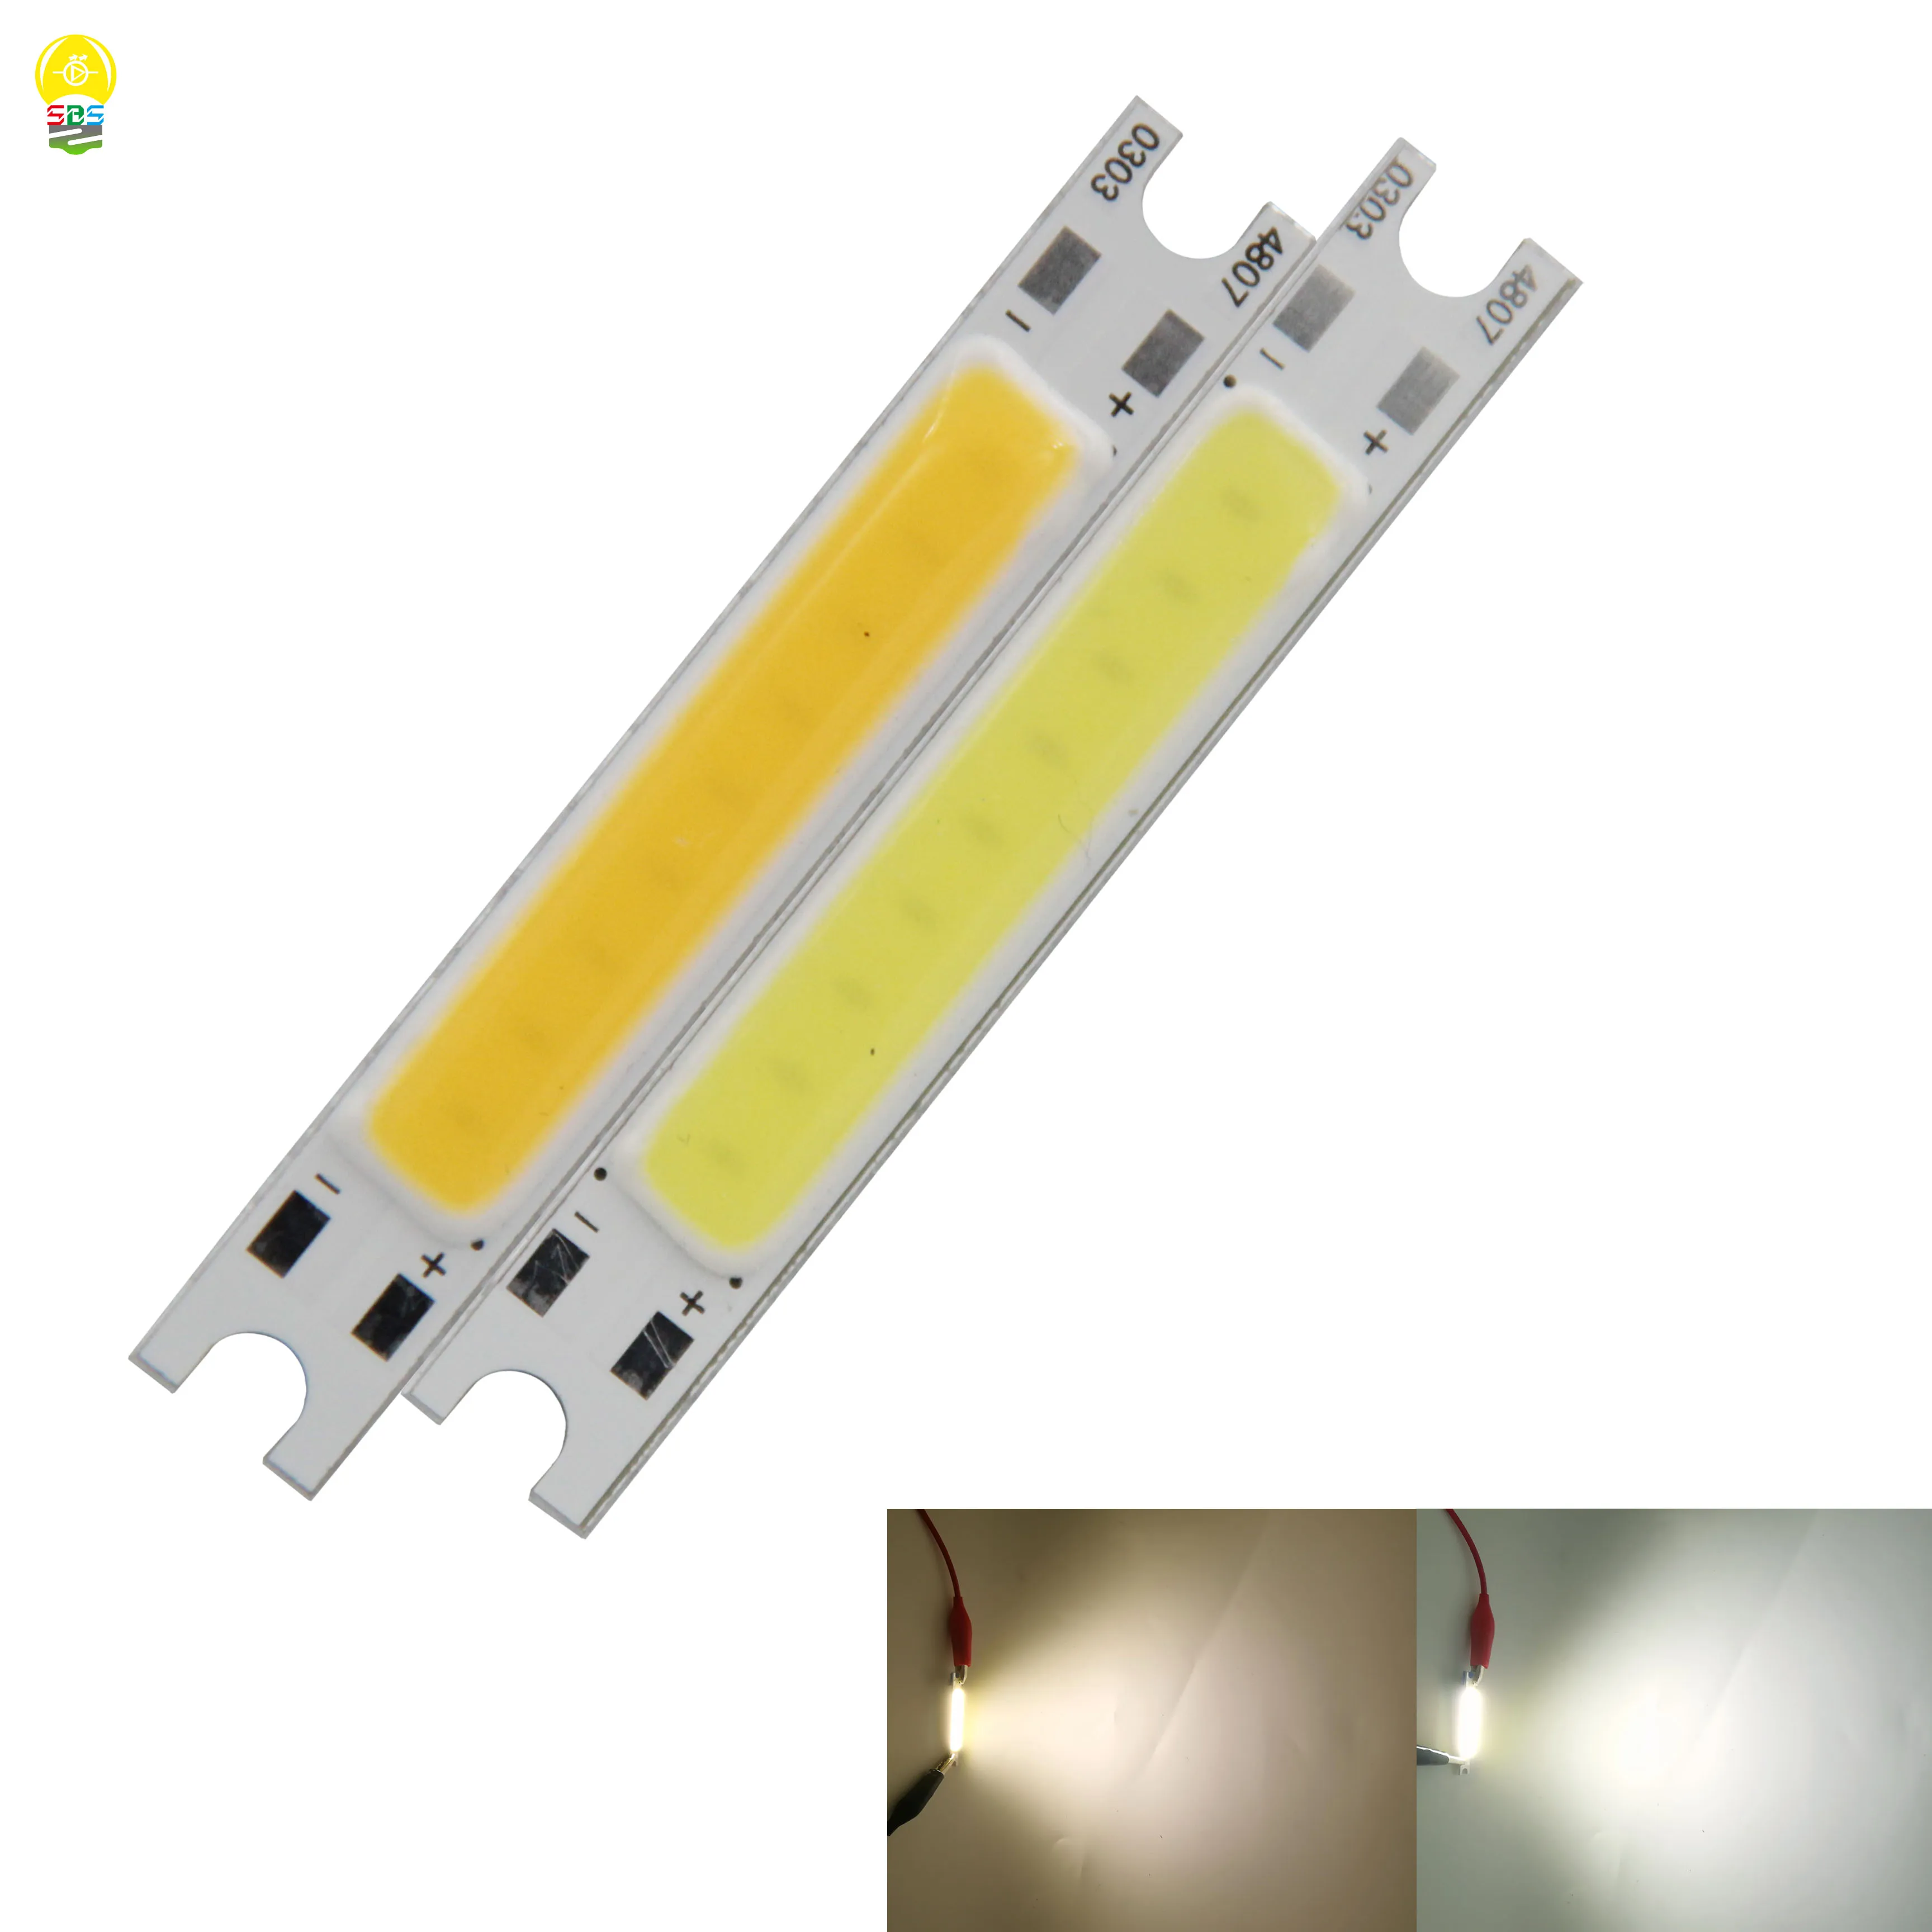 

SUMBULBS 48x7mm LED COB Strip Light Source Bar 9V 3W Cold Warm White for Wall Work Lamp DIY Multi-function Bulb